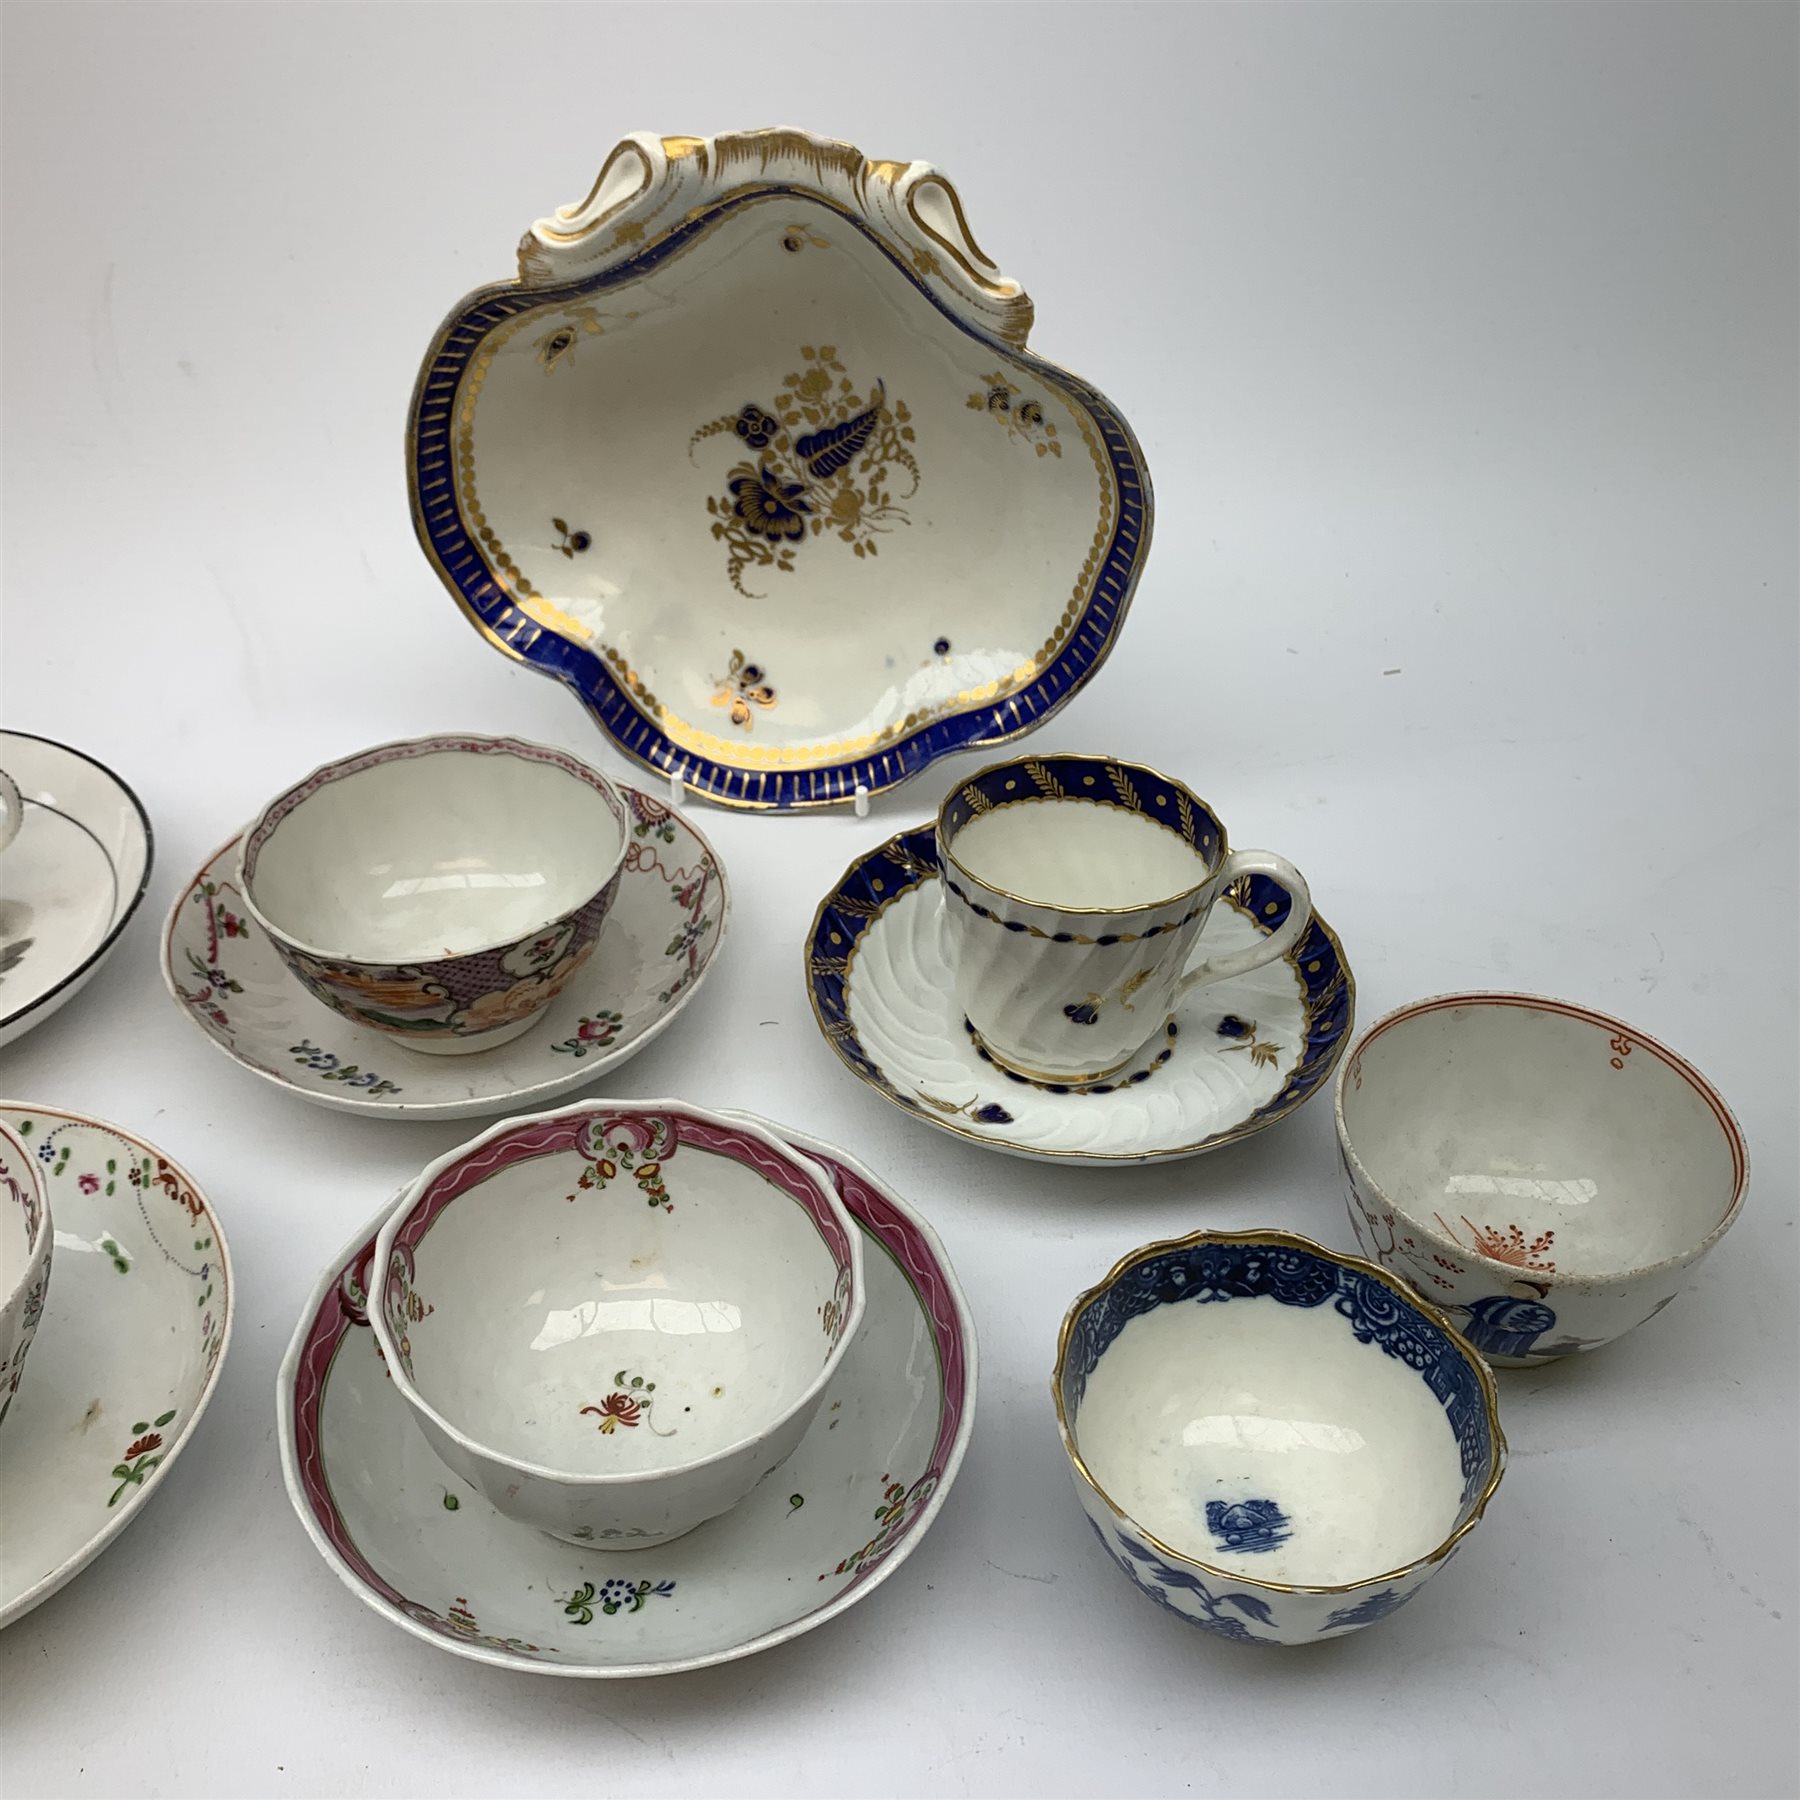 Collection of 18th century and 19th century porcelain, to including examples by Newhall and Worceste - Image 6 of 8